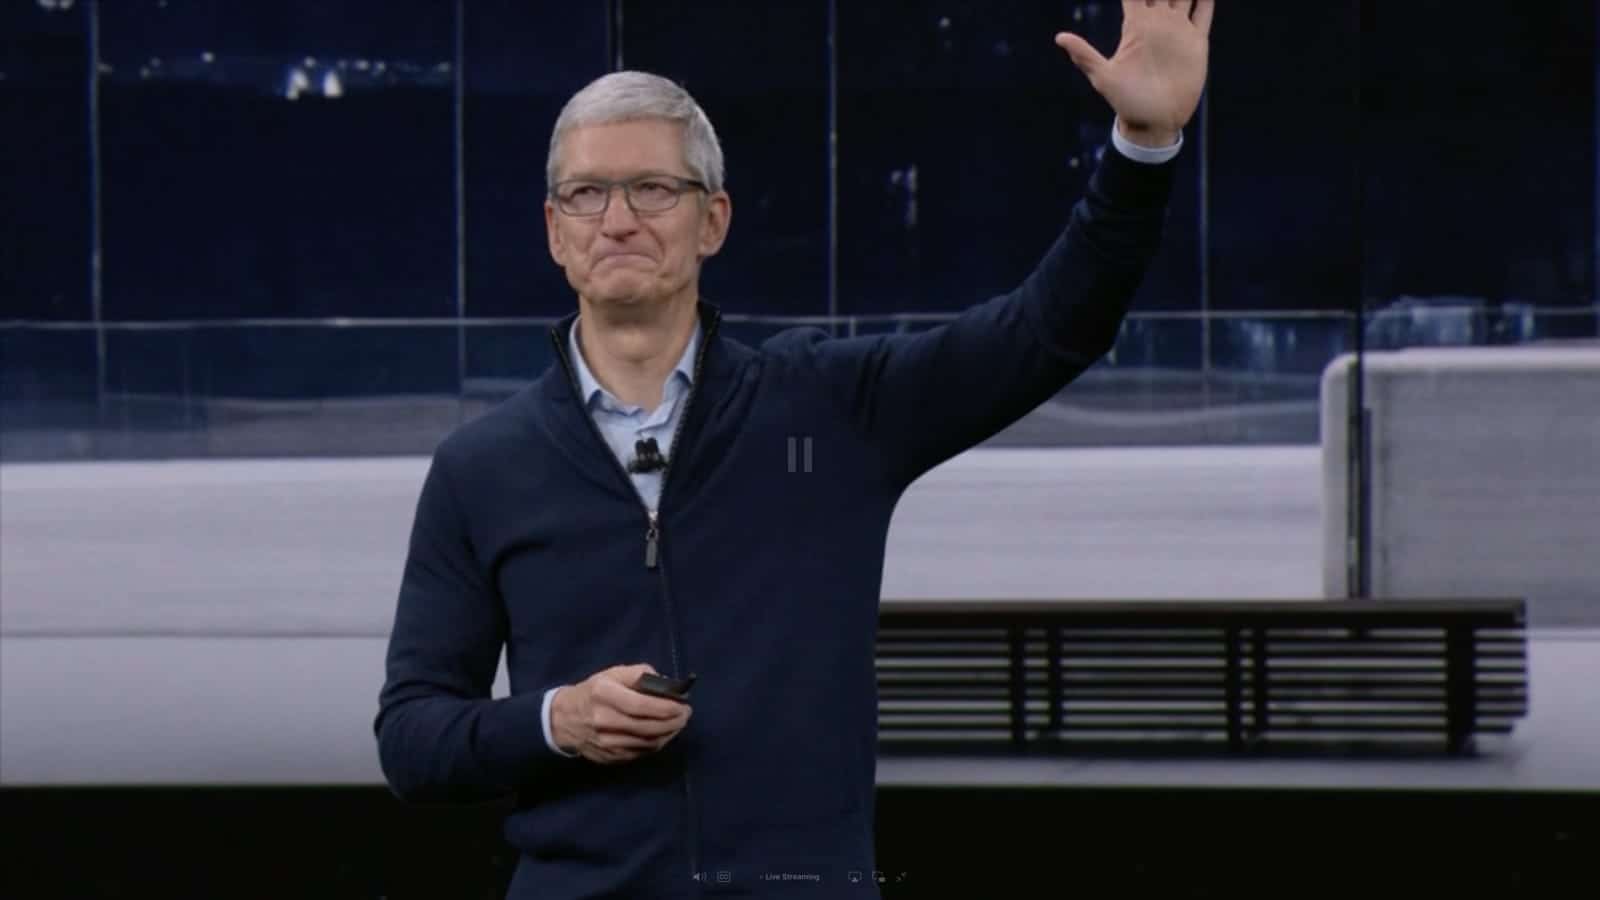 Tim Cook still hid a few surprises up his sleeve for the iPhone X event.